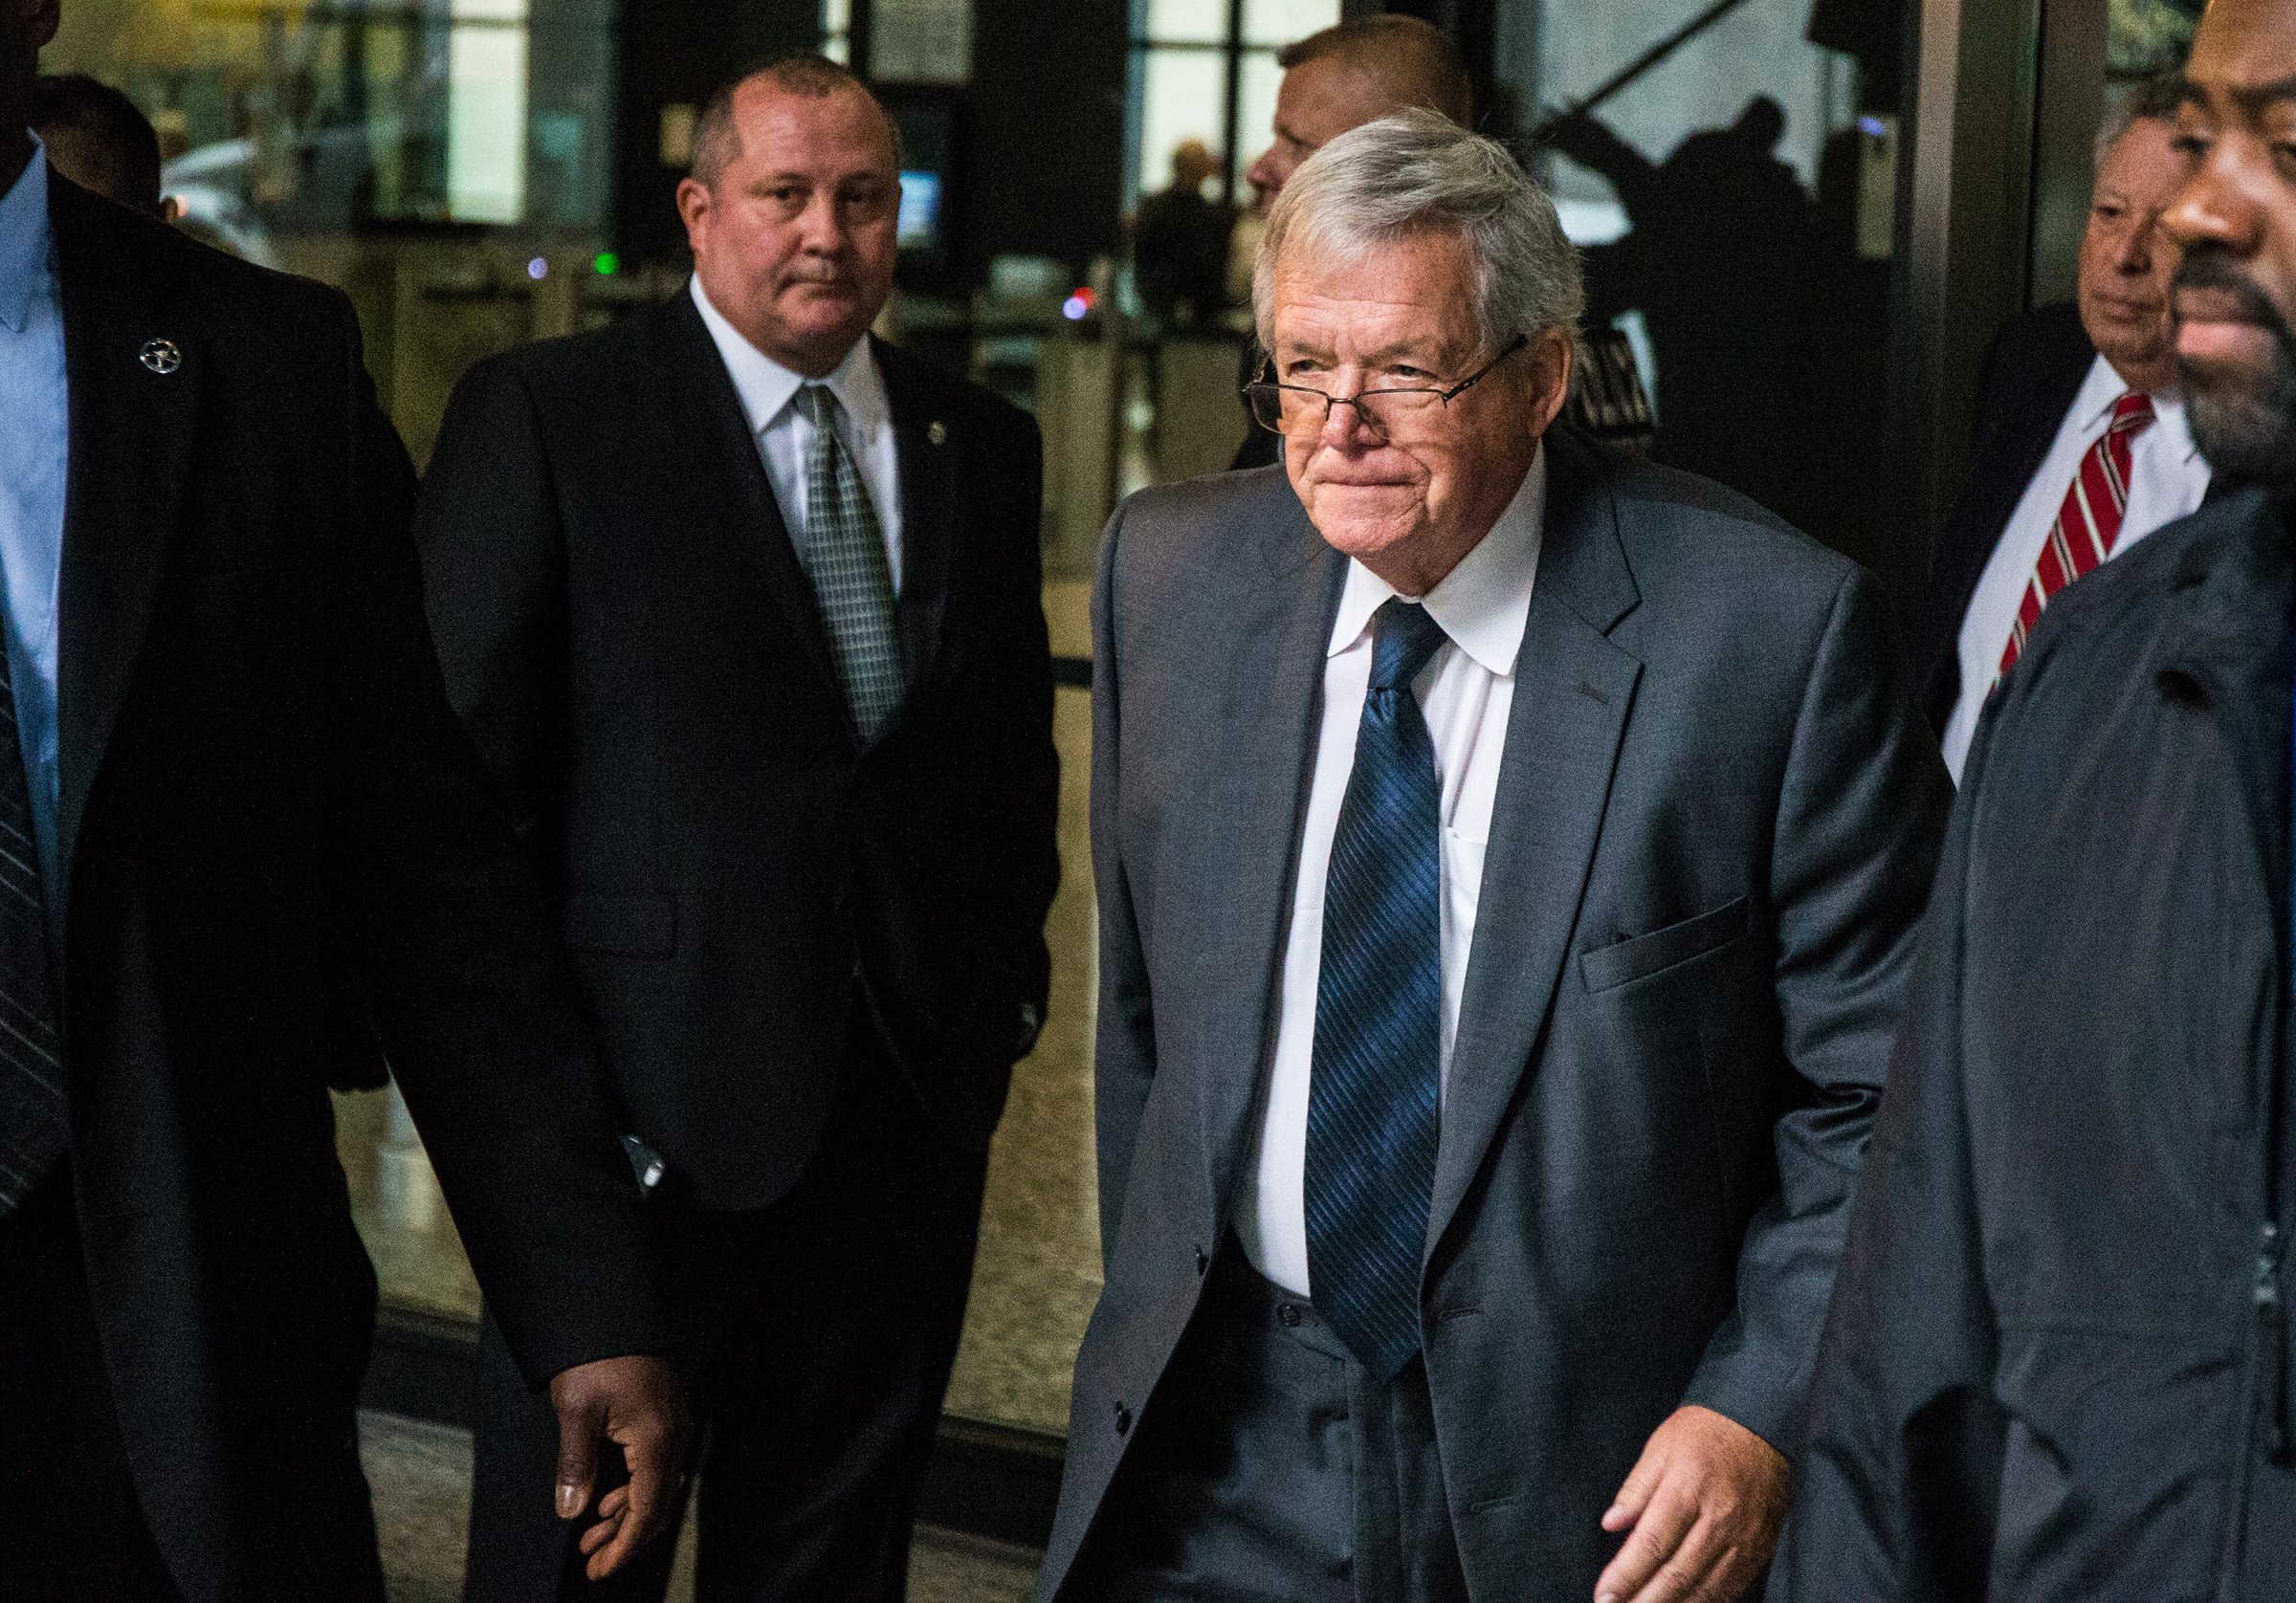 Former U.S. House Speaker Dennis Hastert leaves after a guilty plea at Dirksen U.S. Courthouse on Wednesday, Oct. 28, 2015 in Chicago.